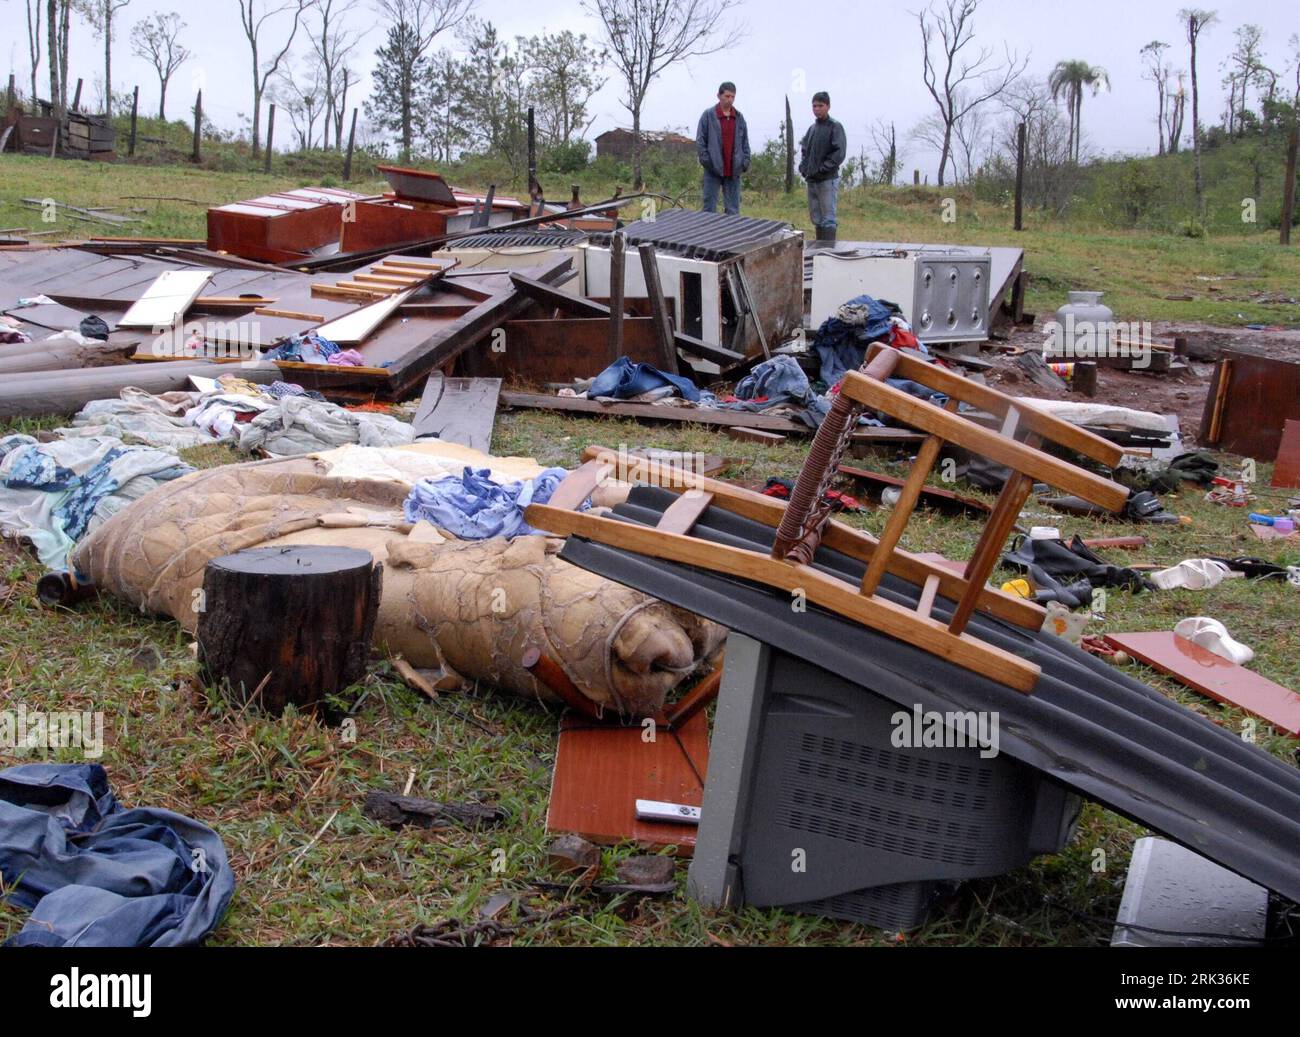 Bildnummer: 53333715  Datum: 08.09.2009  Copyright: imago/Xinhua (090909) -- SAN PEDRO, Sept. 9, 2009 (Xinhua) -- Local residents search for usable belongings at the debris of the tornado-attacked houses in San Pedro, Misiones province in the north of Argentina, Sep. 8, 2009. A tornado swept the north of Argentina early Tuesday morning, killing at least 10 and injuring 51 others, 18 of them in serious conditions. (Xinhua/Ignacio Vazquez) (gj) (5)ARGENTINA-MISIONES-TORNADO PUBLICATIONxNOTxINxCHN Sturmschäden Sturm Schäden Tornado Argentinien premiumd kbdig xsp 2009 quer  o00 Naturkatastrophe Stock Photo